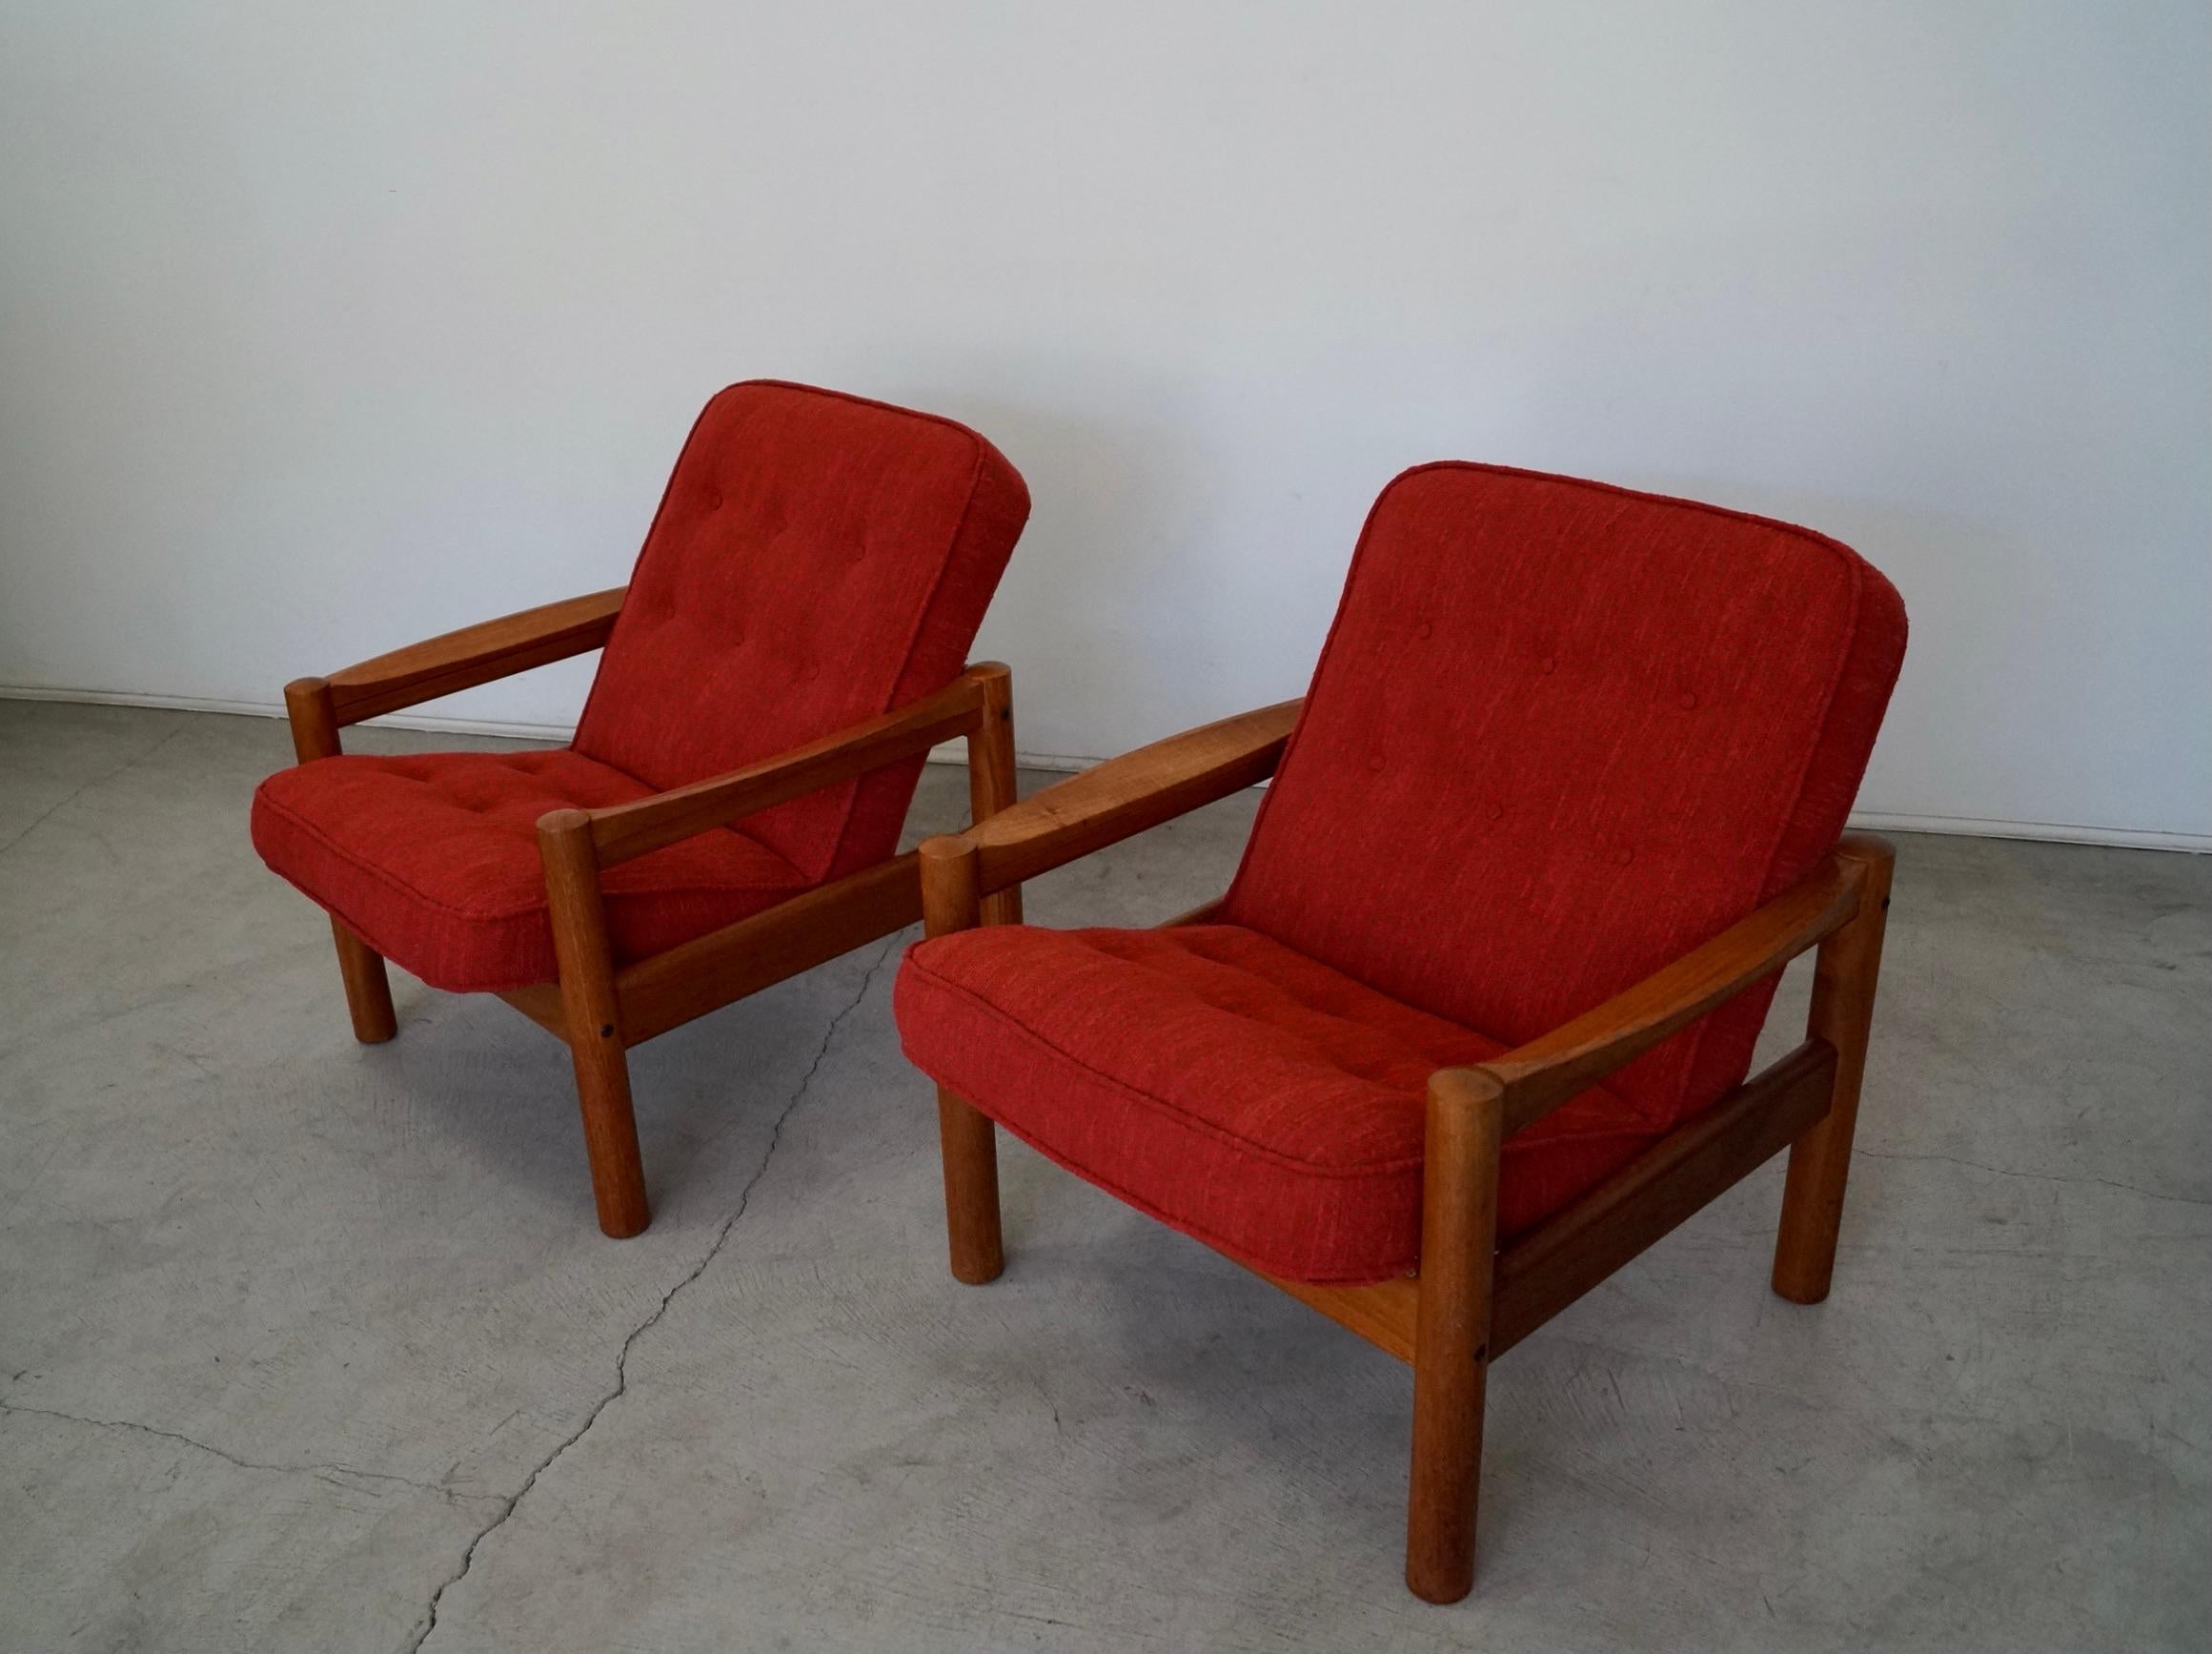 1970's Danish Modern Teak Lounge Chairs by Domino Mobler - a Pair For Sale 1